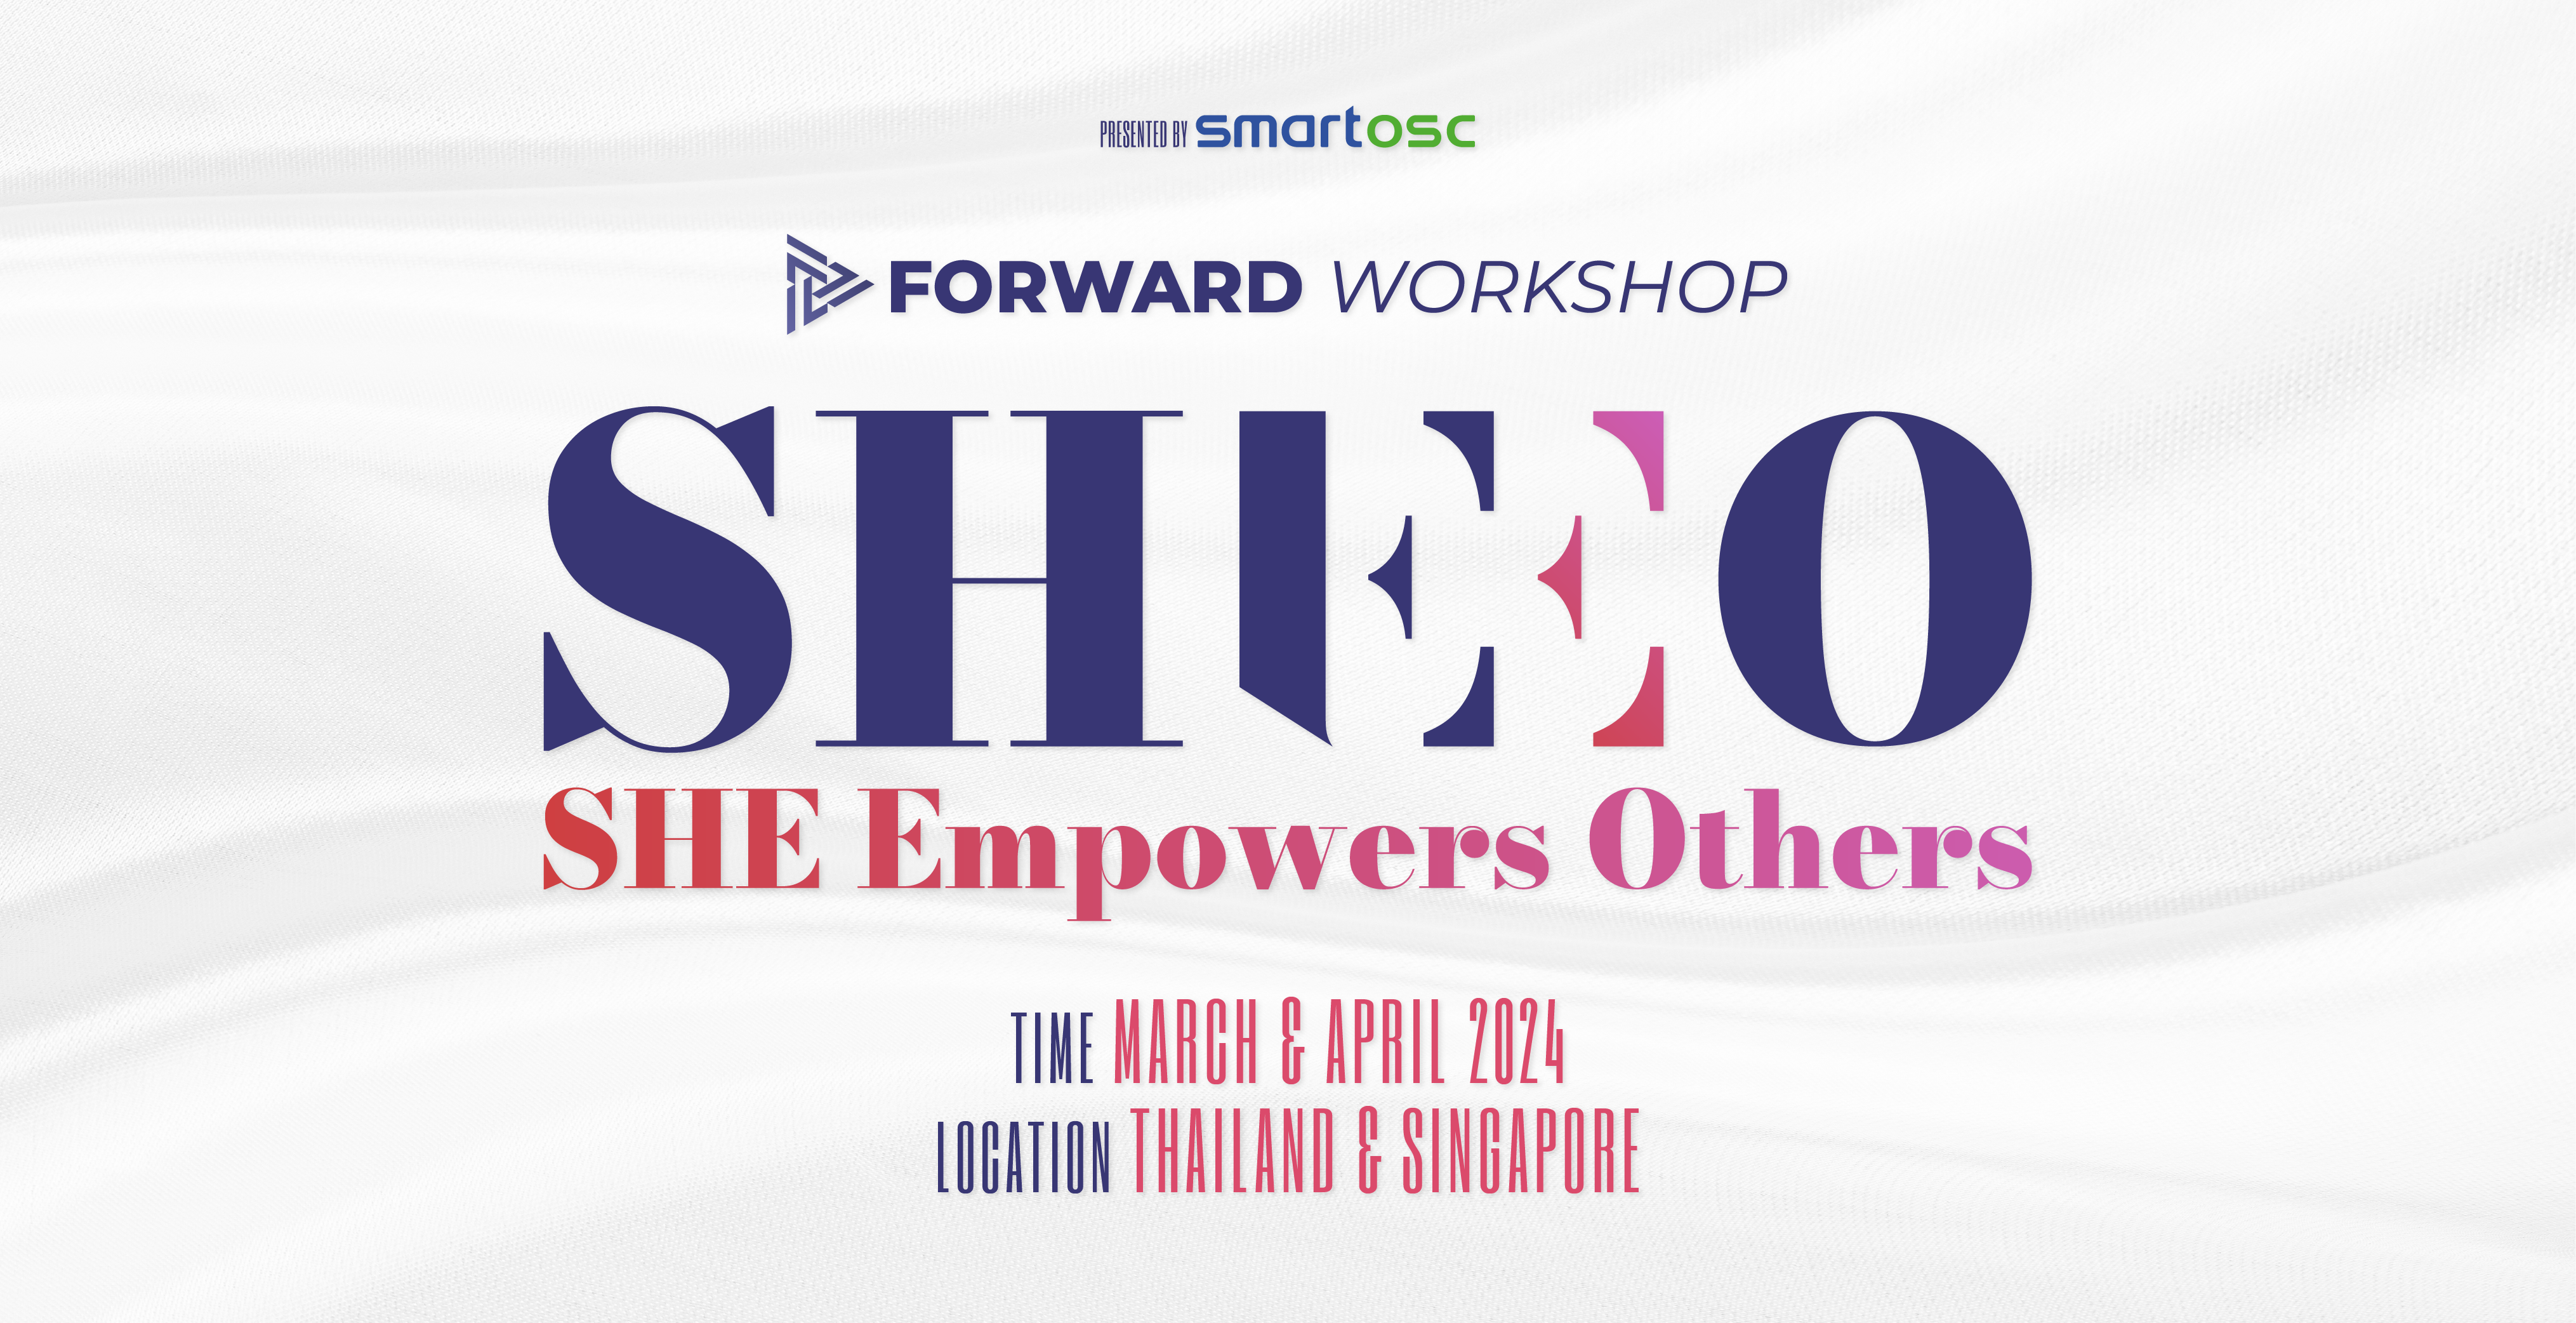 Forward Workshop: SHEEO – SHE Empowers Others